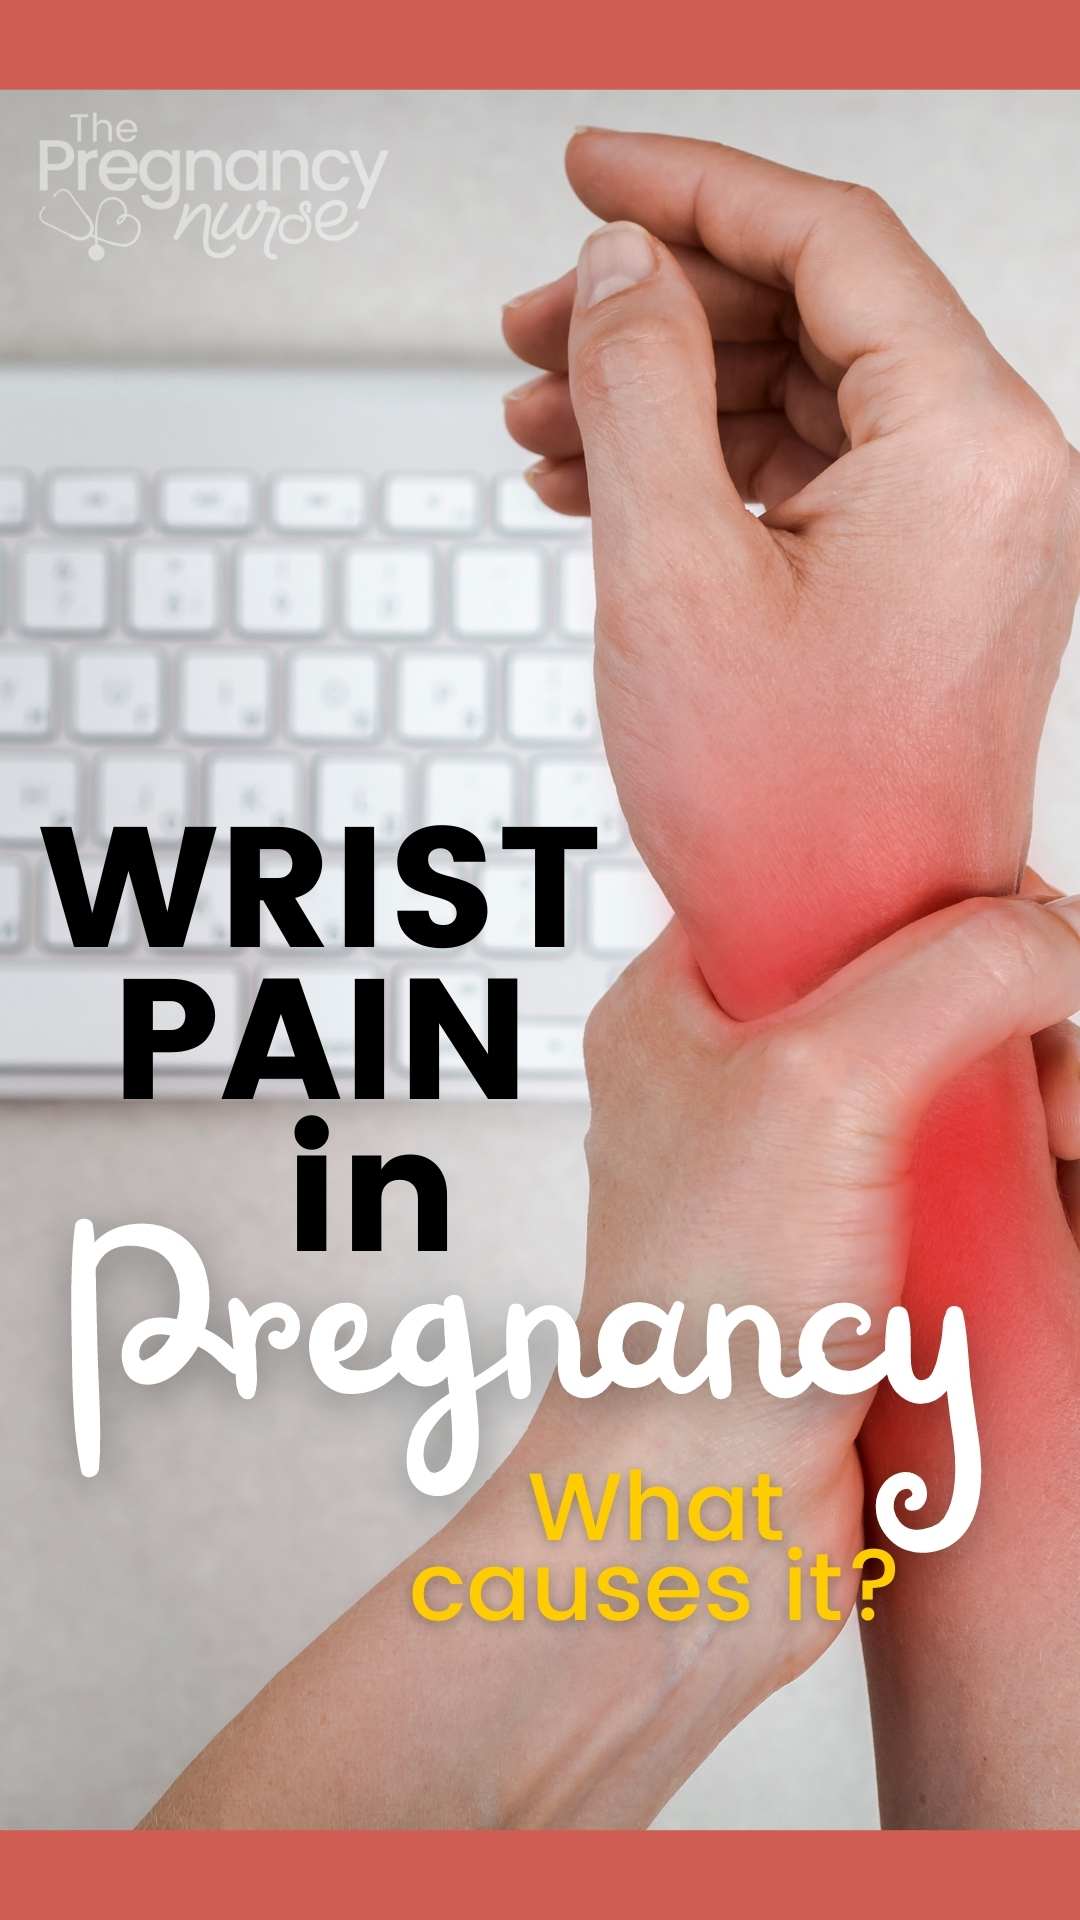 Carpal tunnel syndrome creates wrist pain during pregnancy. Muscles pinch the median nerve as it passes down your wrist creating numbness, tingling and it is common during pregnancy.